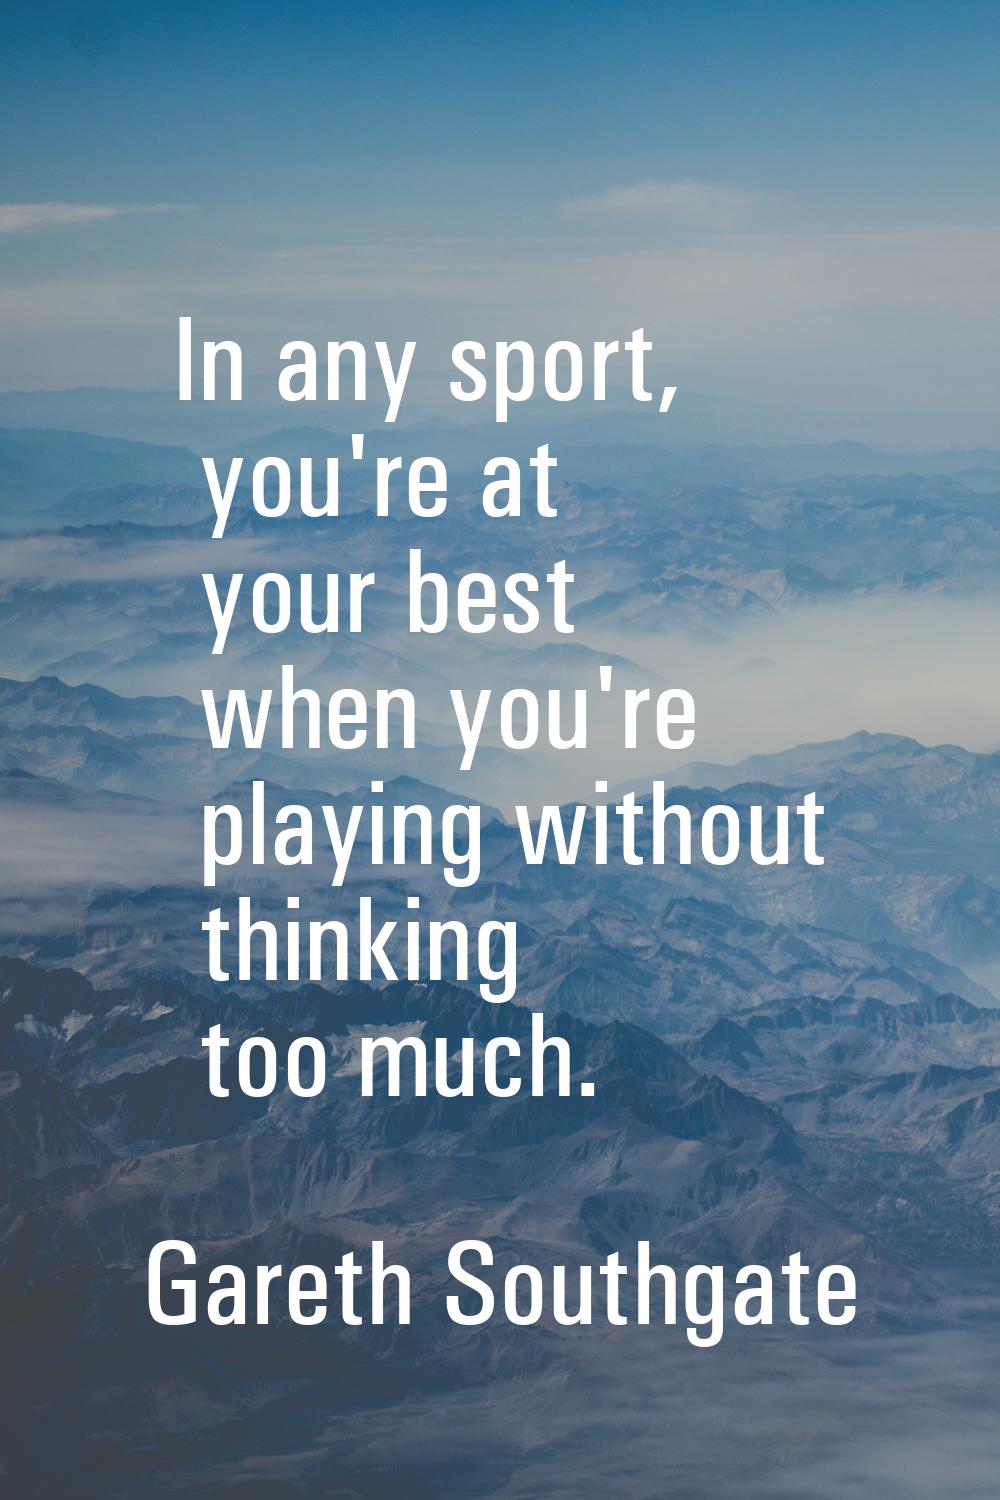 In any sport, you're at your best when you're playing without thinking too much.